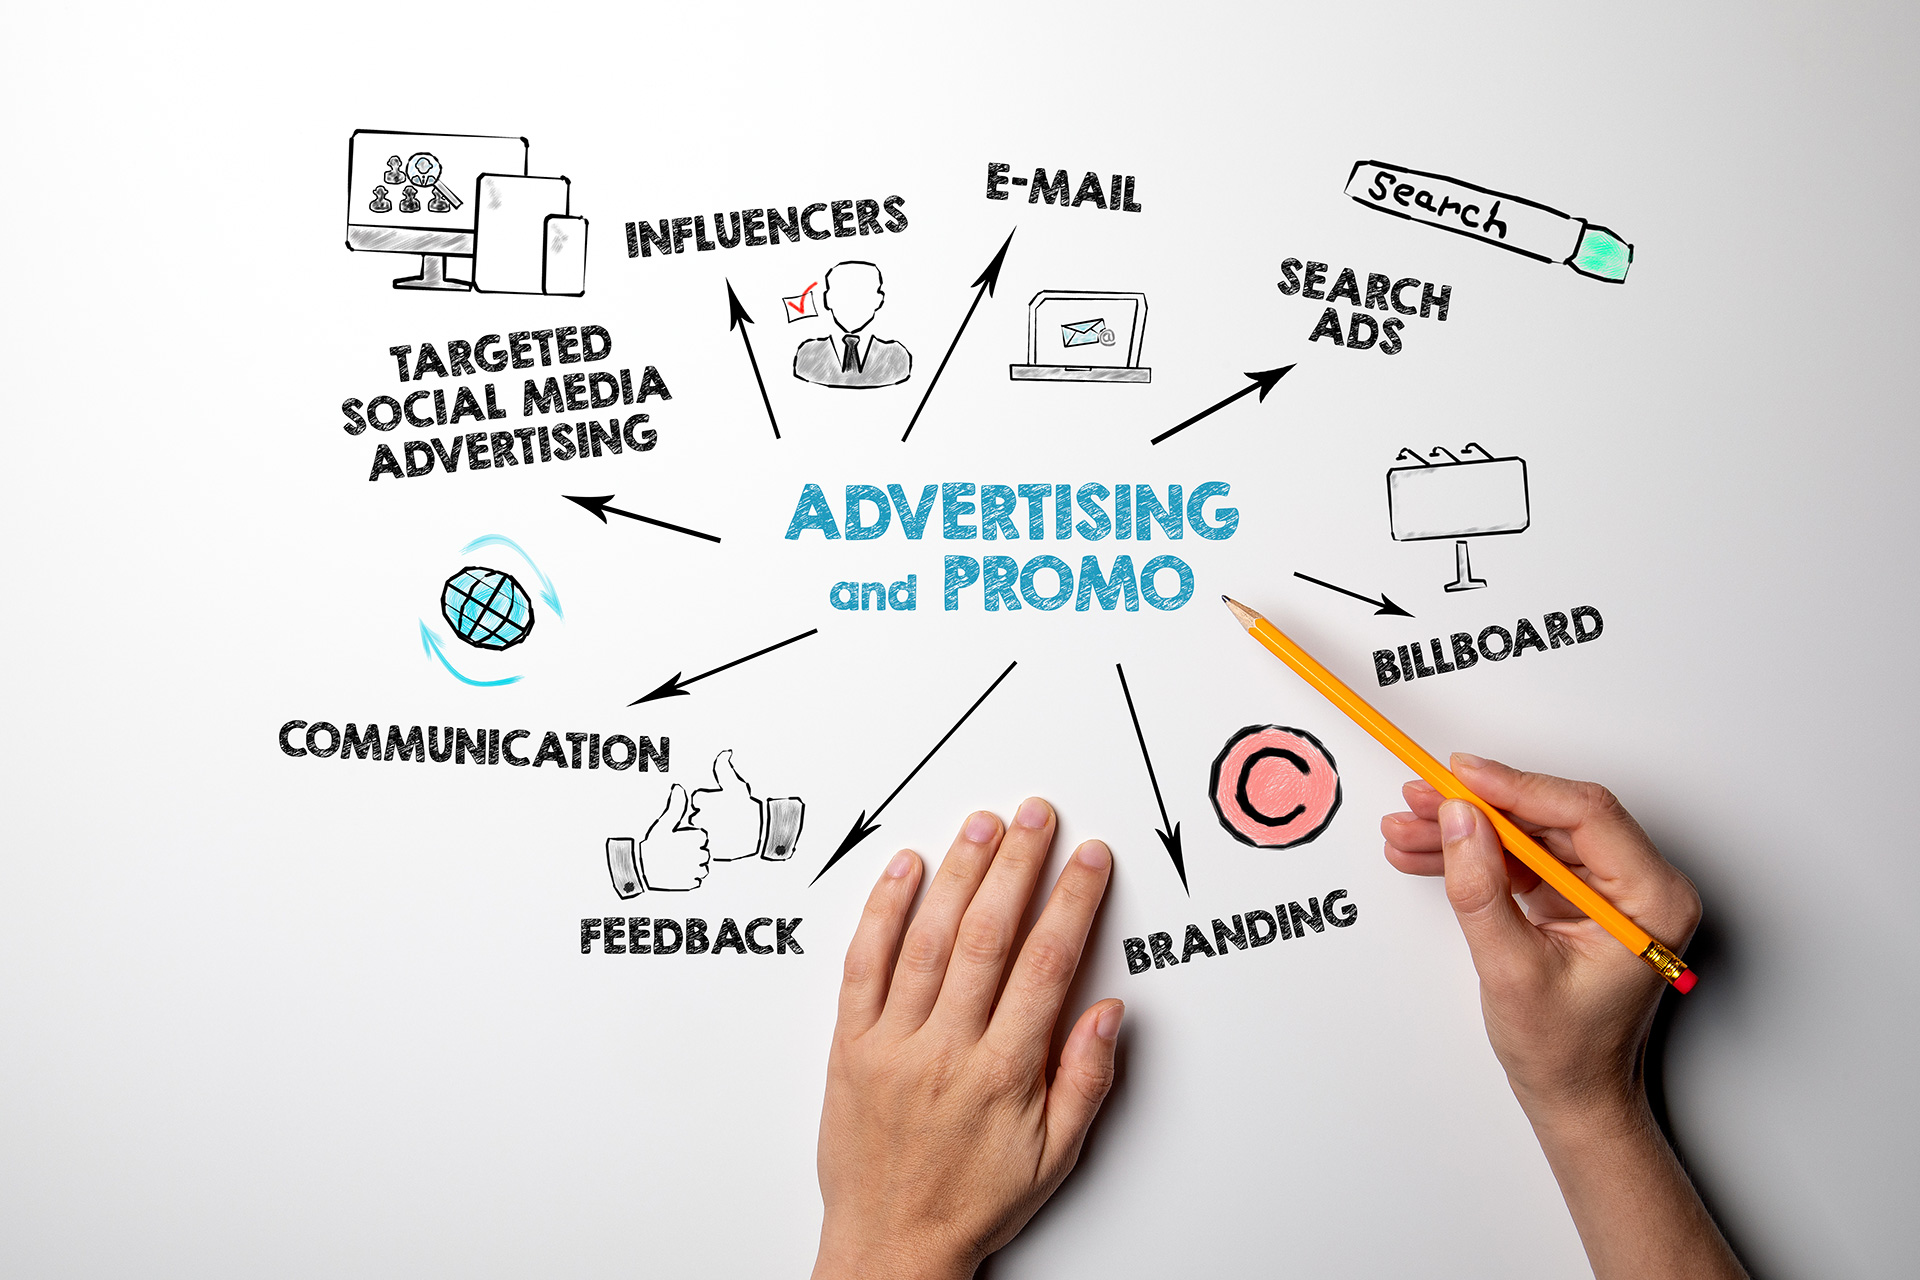 Marketing and advertising